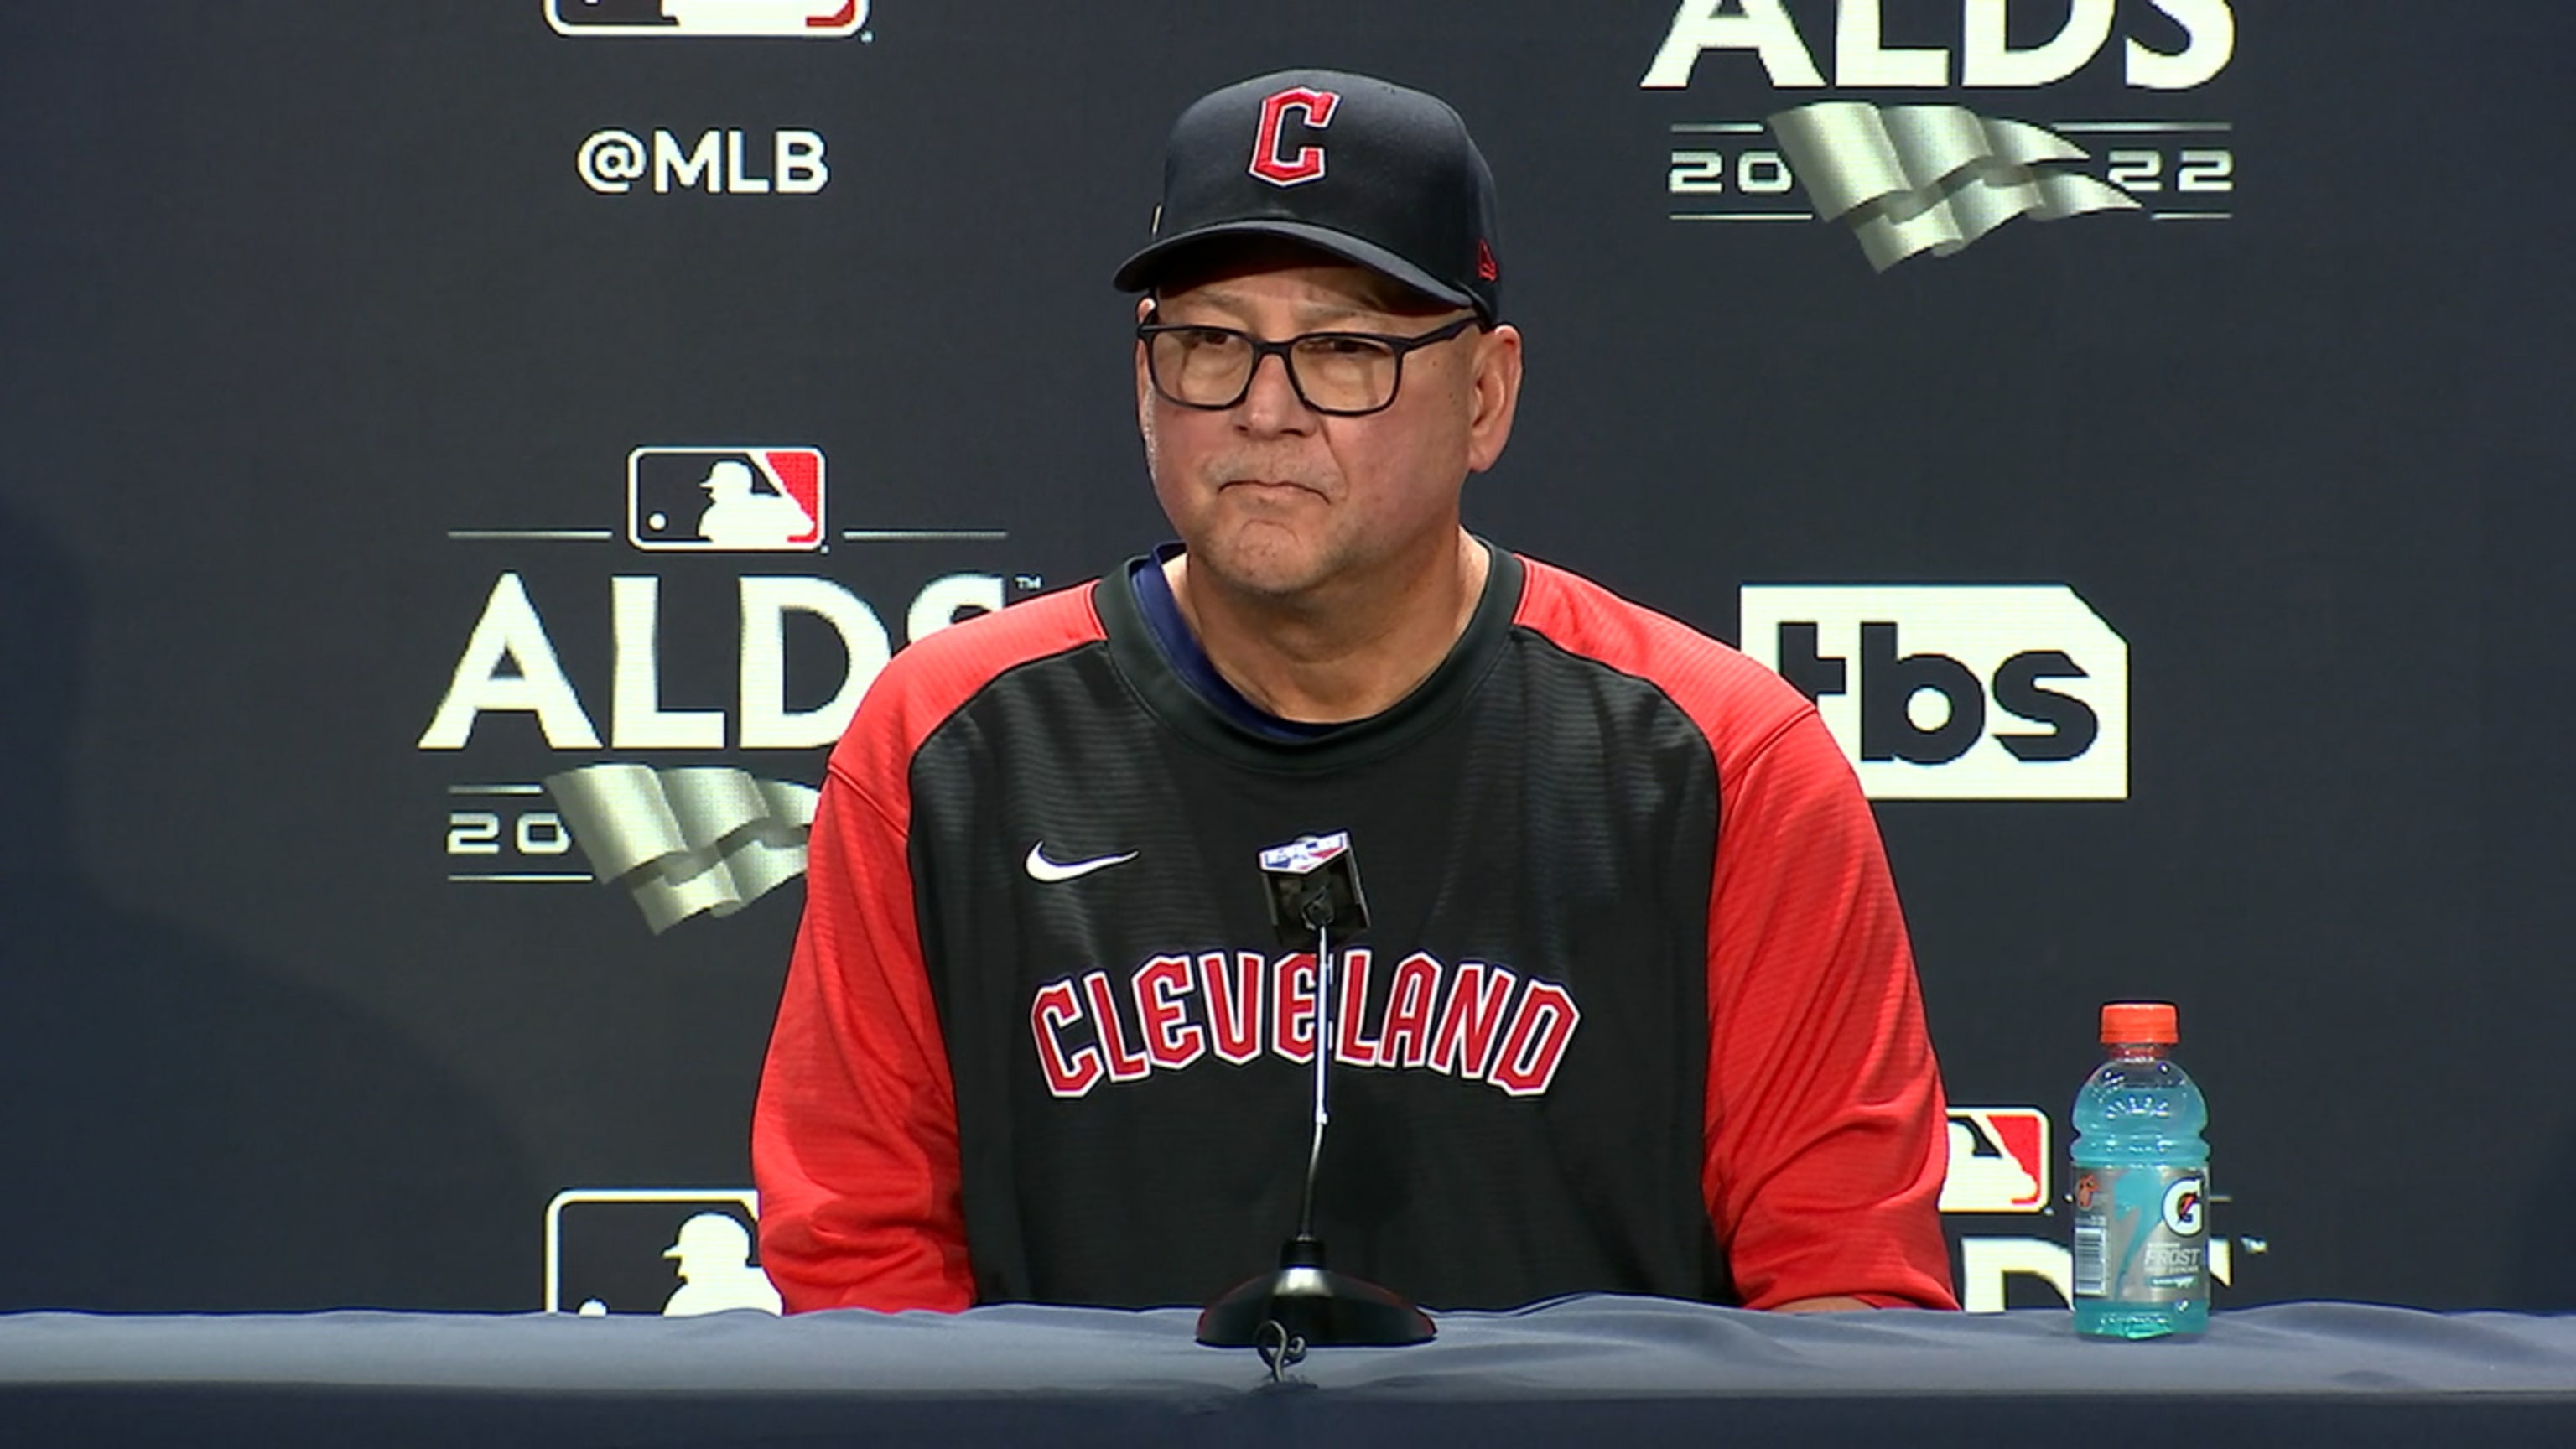 Terry Francona to manage Guardians in 2023